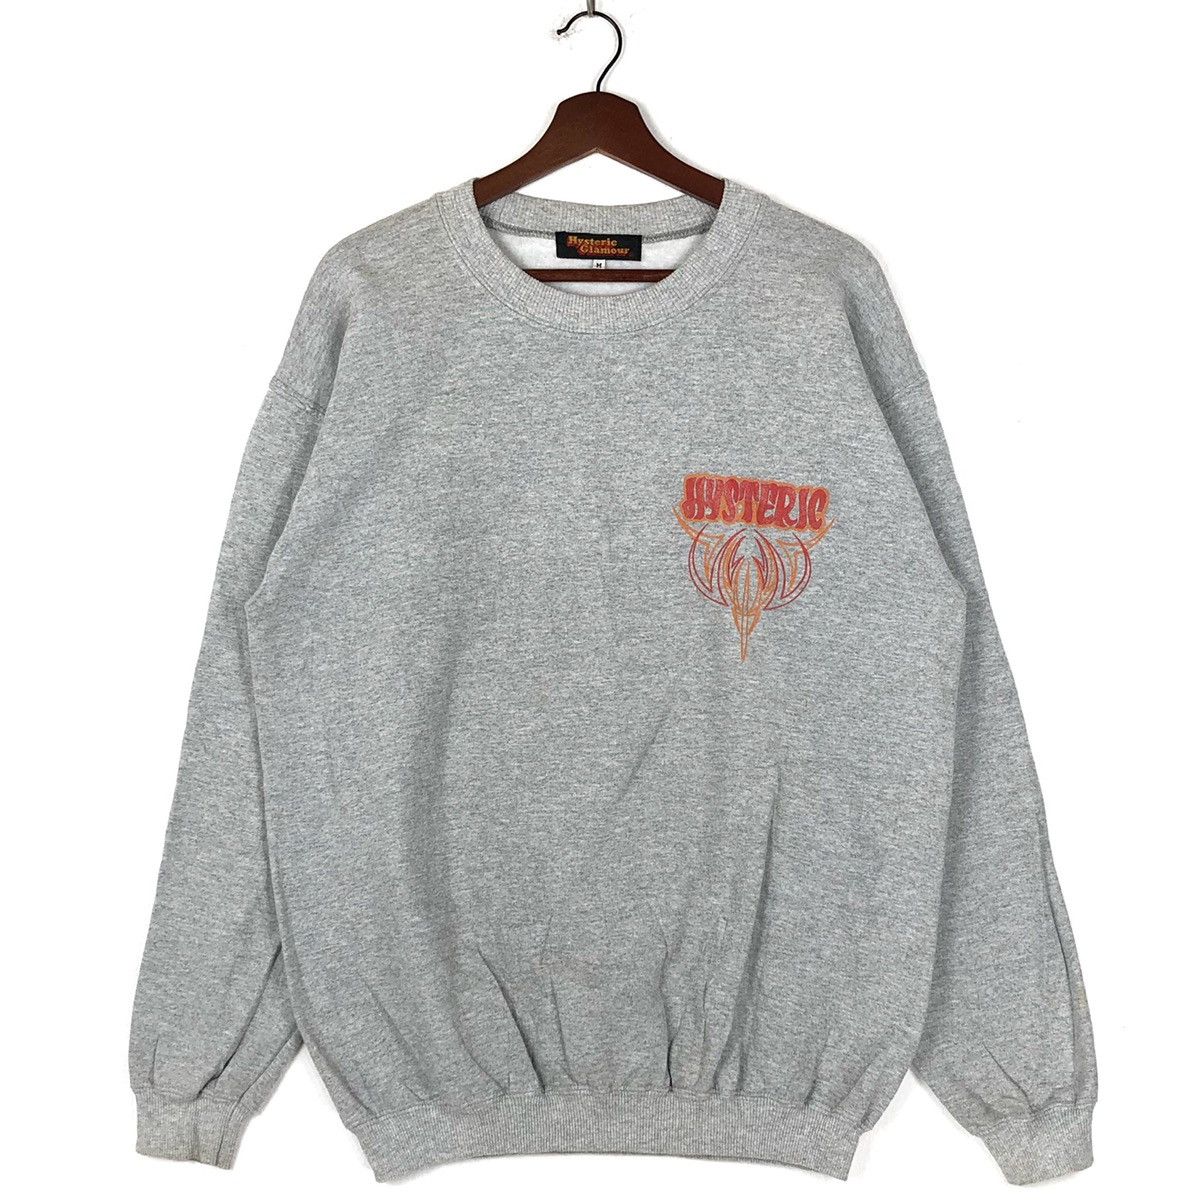 Pre-owned Hysteric Glamour X Vintage Hysteric Glamour Crewneck Sweatshirt In Grey